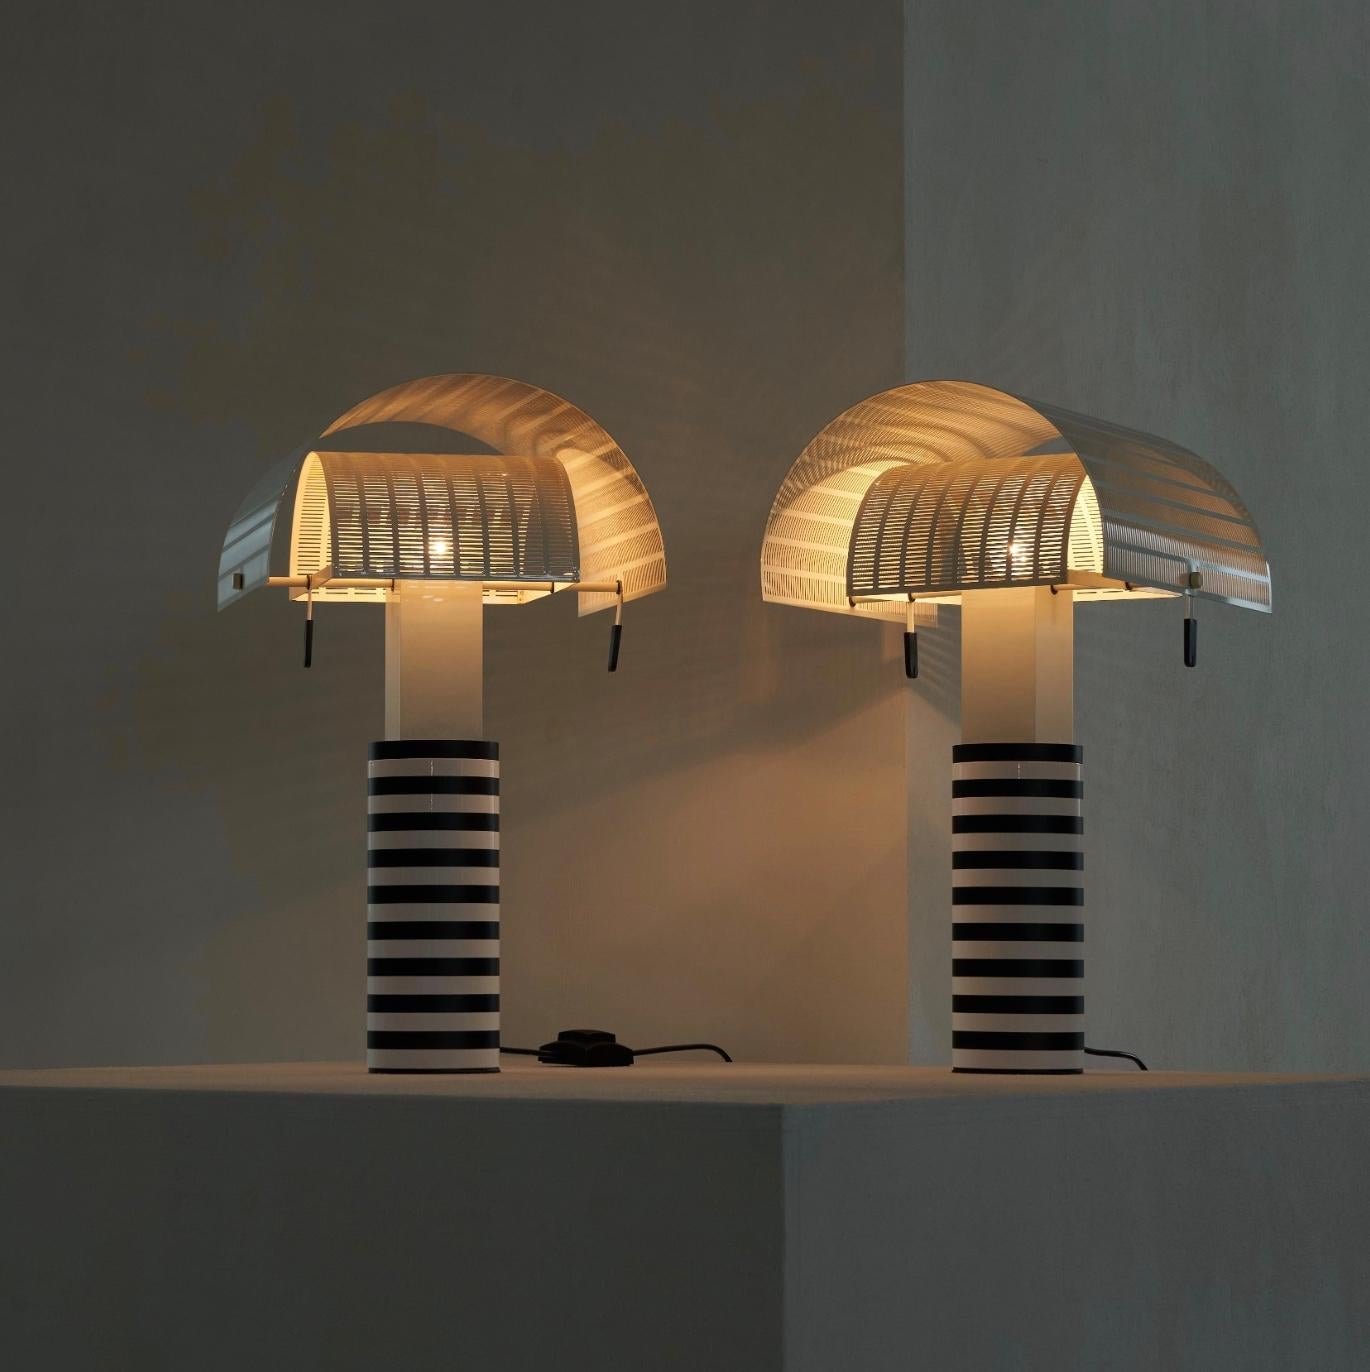 Exceptional pair of iconic vintage 'Shogun' Table Lamps by architect and designer Mario Botta (1943) for Artemide 1986.

Straight from the first owners, these table lamps have always been together. Bought by the original owners in 1987, these lamps